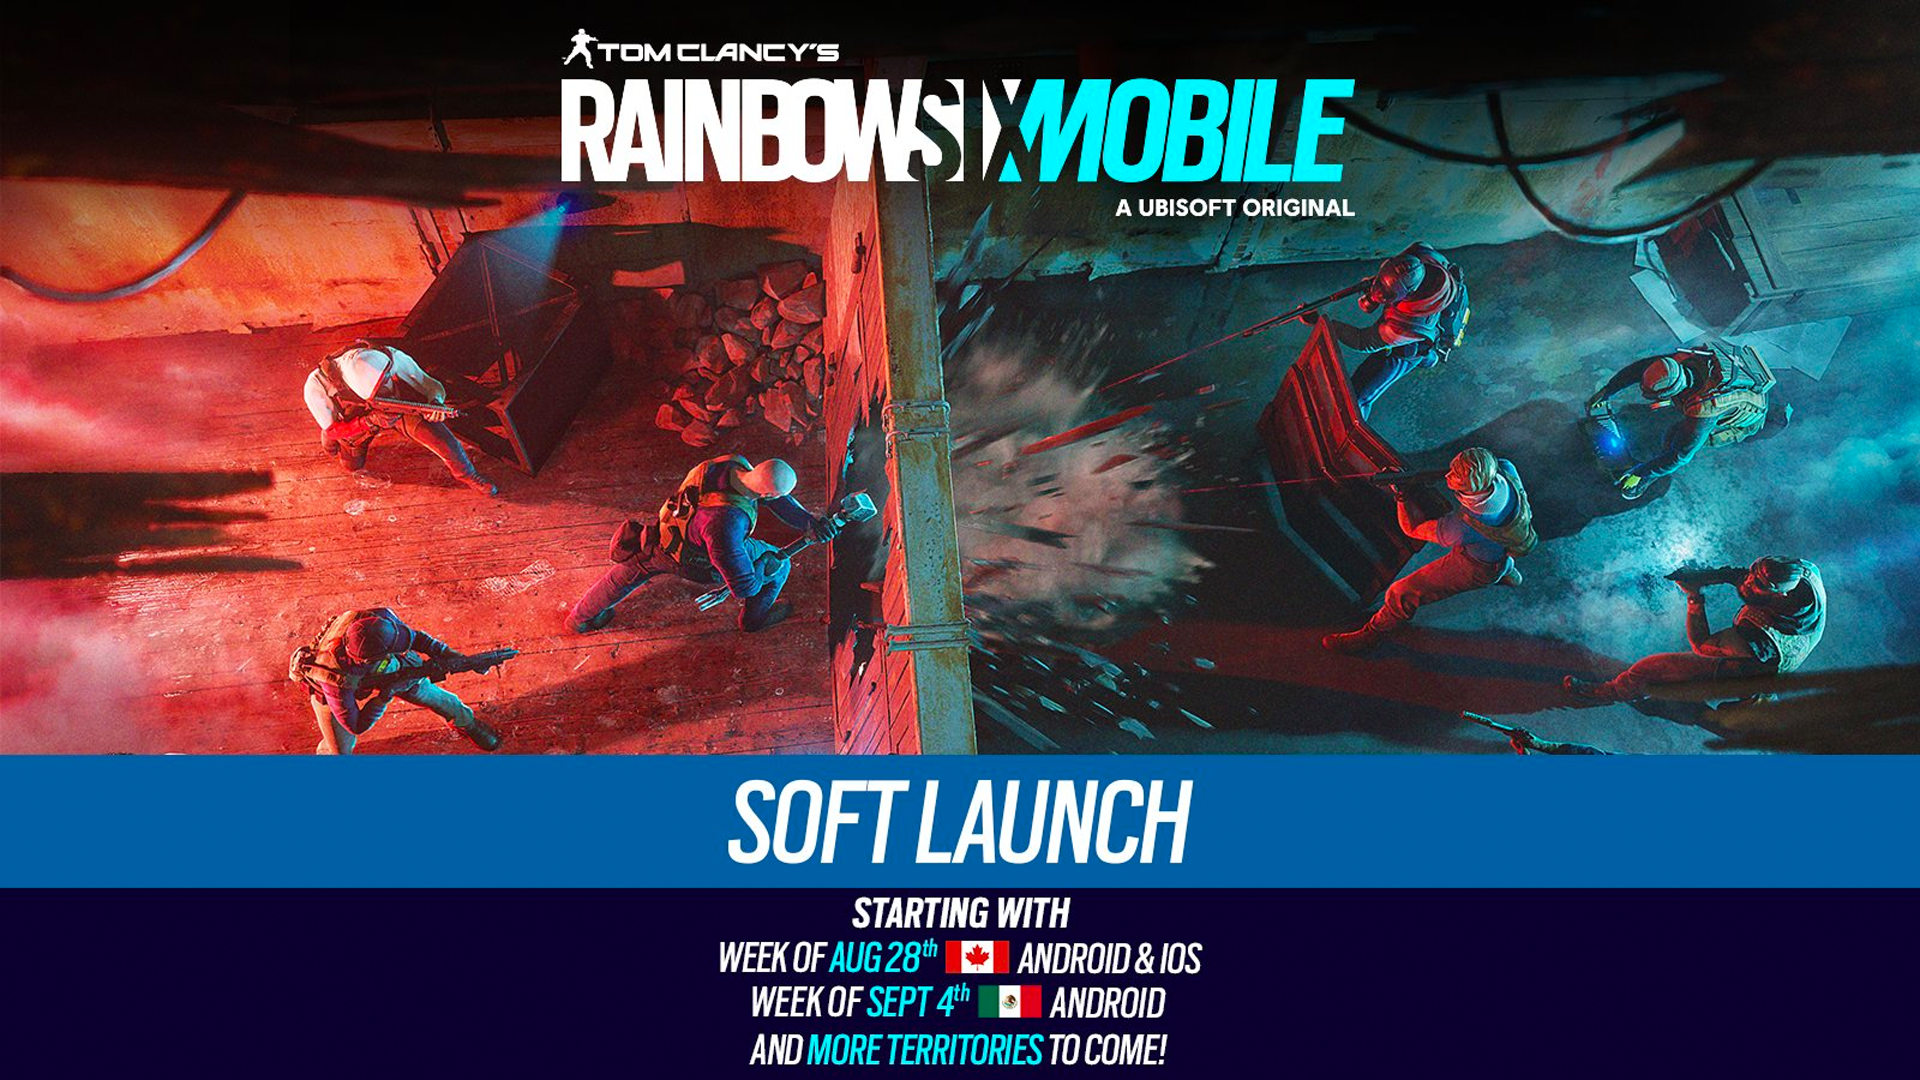 Ubisoft announces Rainbow Six Mobile for iOS and Android